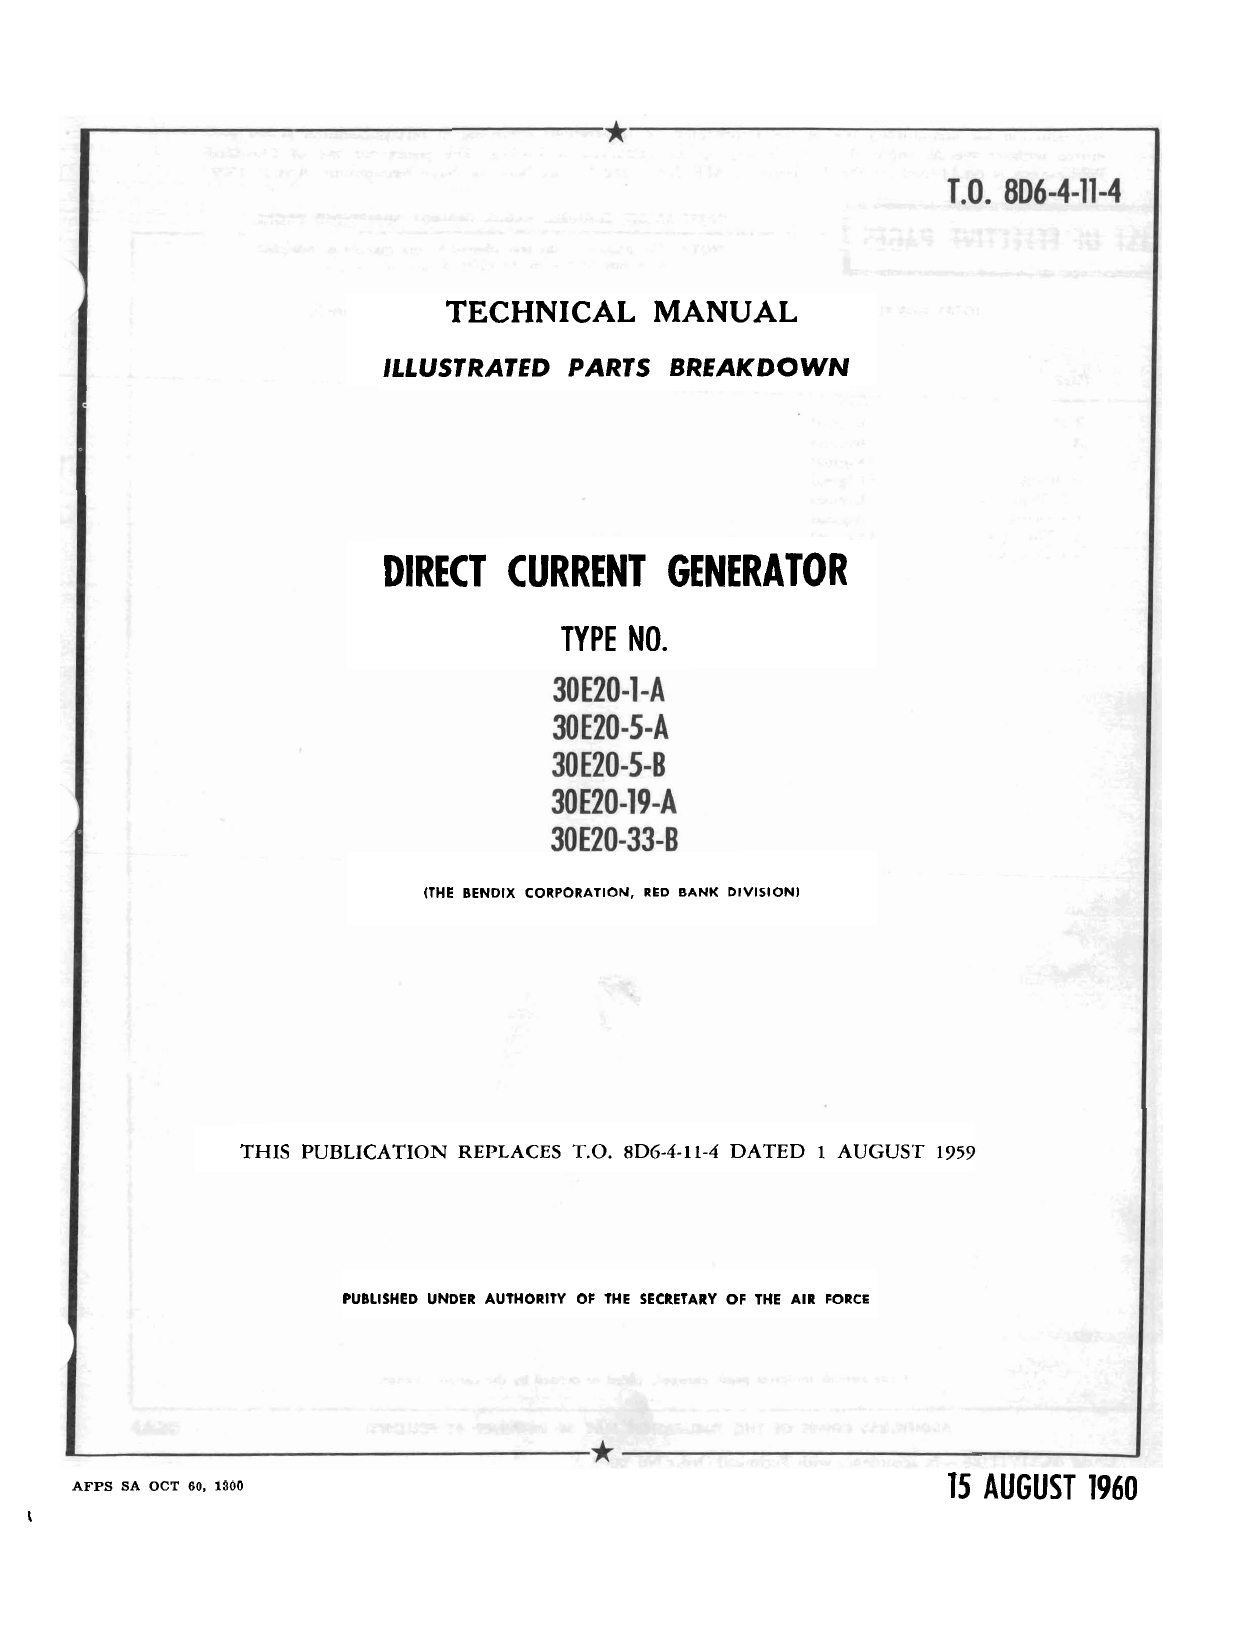 Sample page 1 from AirCorps Library document: Illustrated Parts Breakdown for Direct Current Generator - Types 30E20-1-A, 30E20-5-A, 30E20-5-B, 30E20-19-A, and 30E20-33-B 